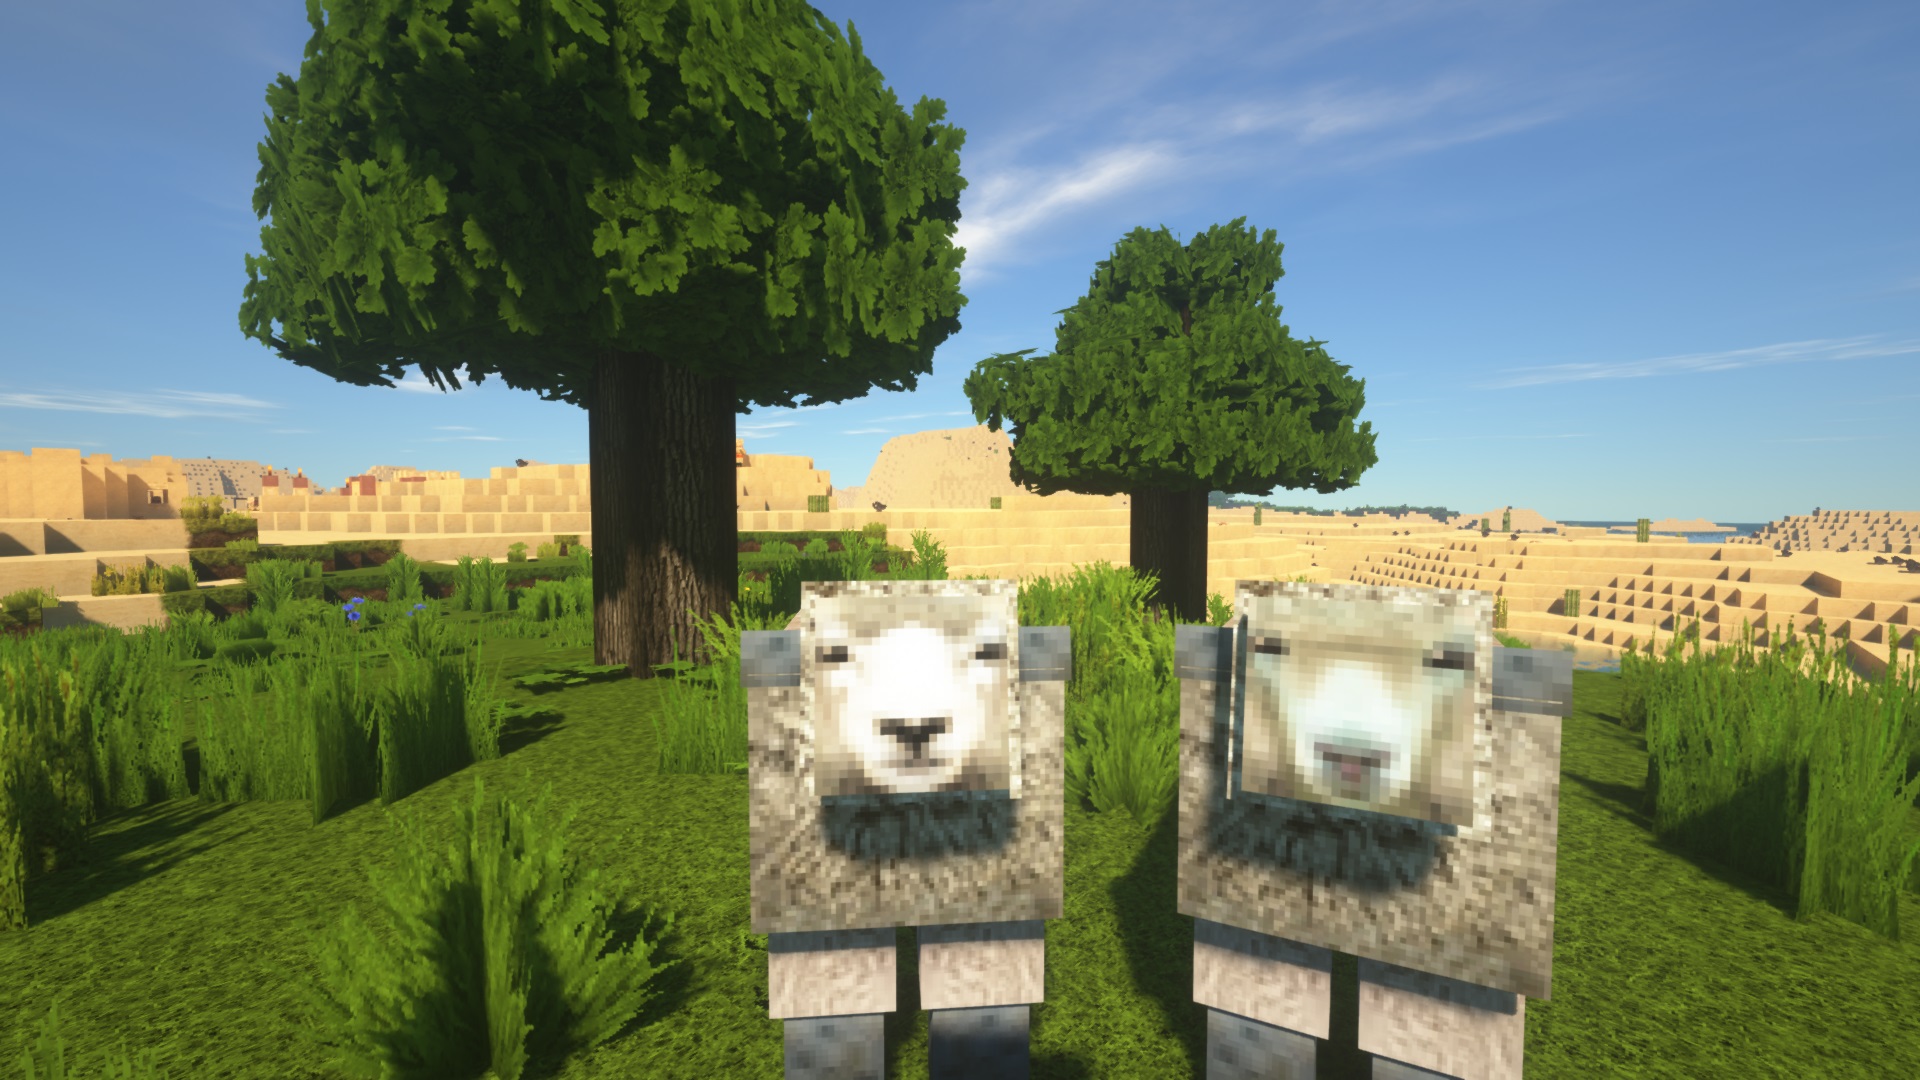 Mineraft texture packs - LB Photo Realism Reloaded - Two sheep with realistic looking faces and fur standing in front of trees with realistic bark textures